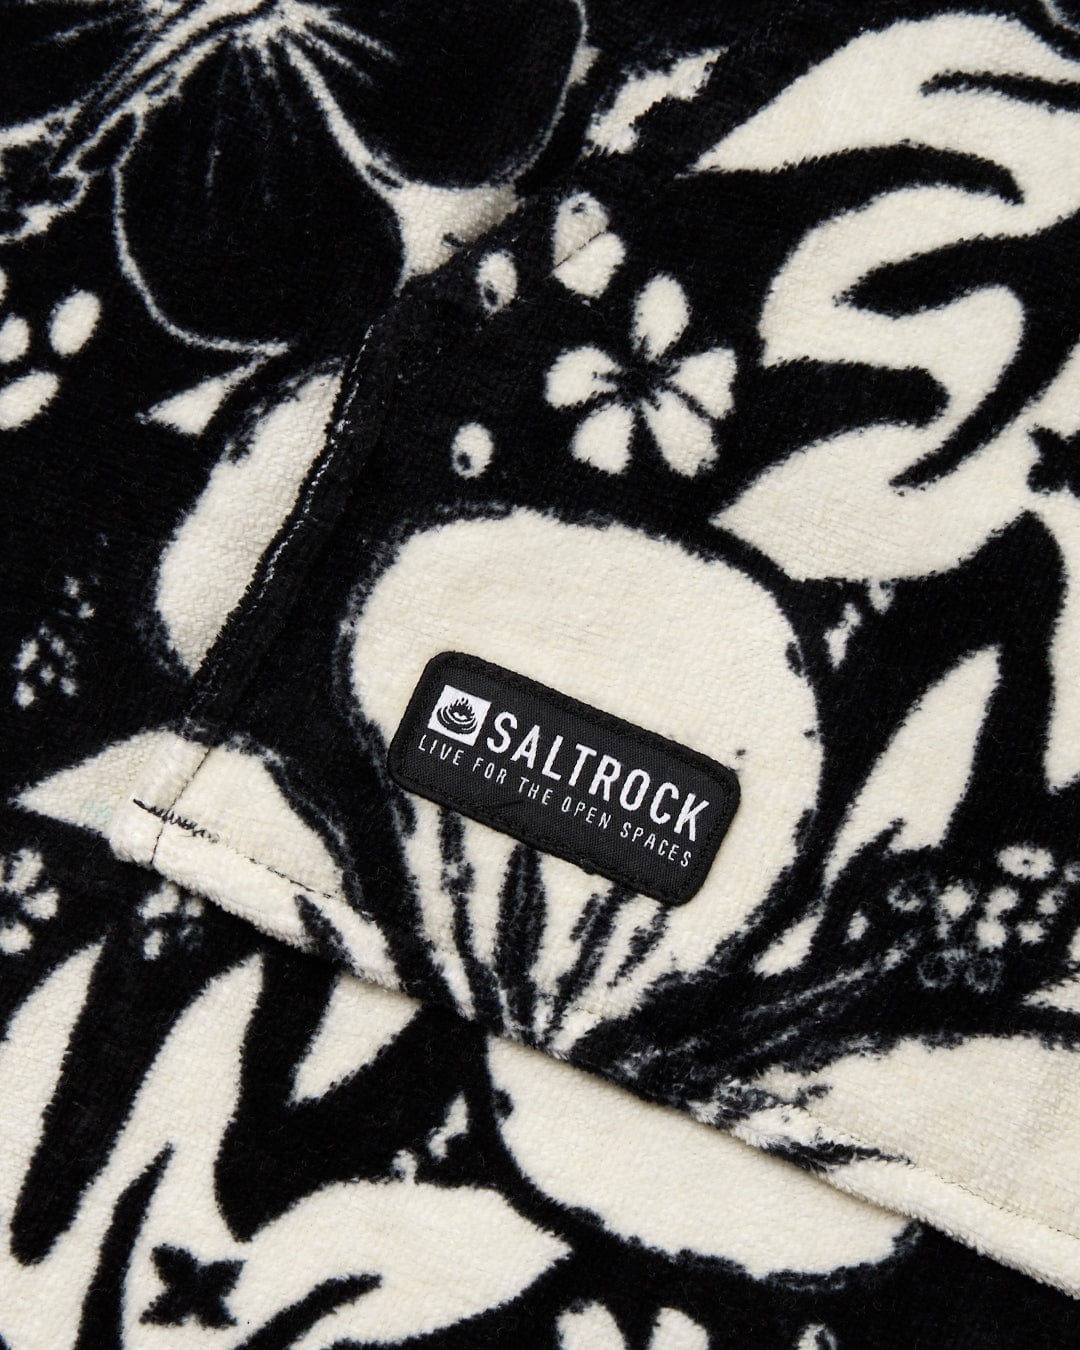 Close-up of a black and white patterned ultra-absorbent "Hibiscus" changing towel with a "Saltrock" brand label.